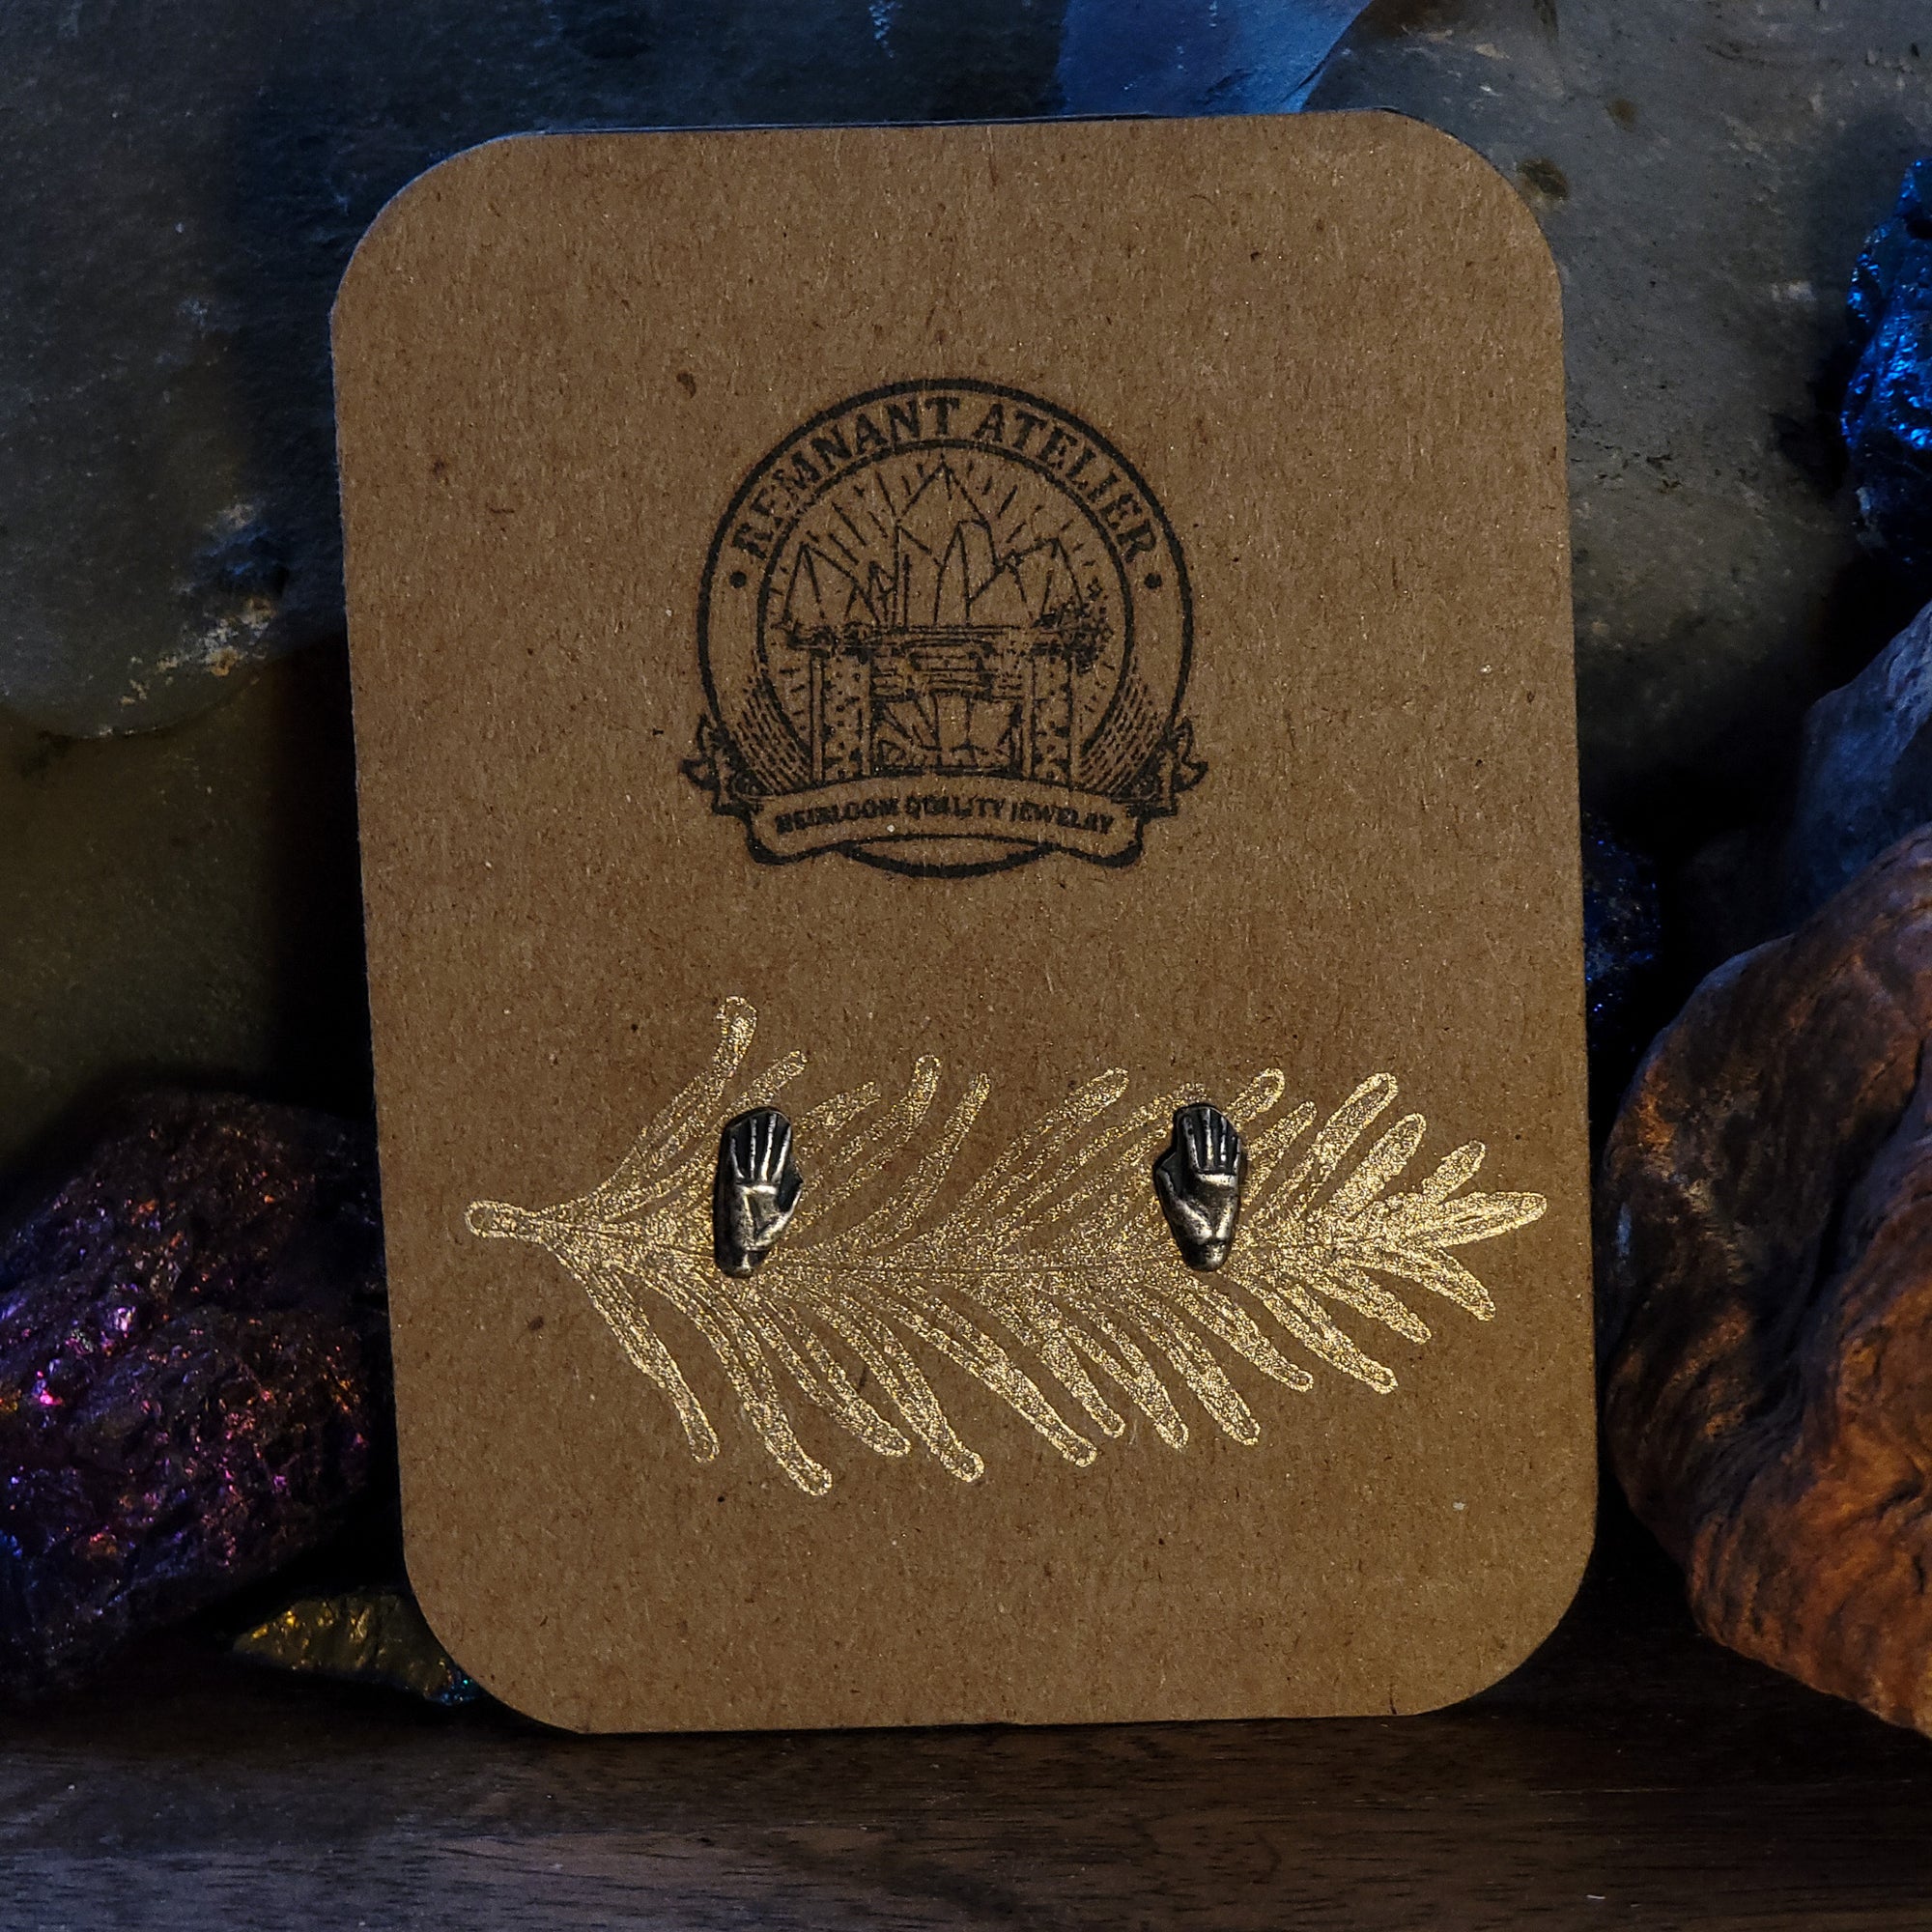 A pair of handmade sterling silver stud earrings in the shape of hands are displayed on a cardboard earring card. The intricate details of the hands are highlighted by the shine of the silver. The earrings are surrounded by sparkling crystals.